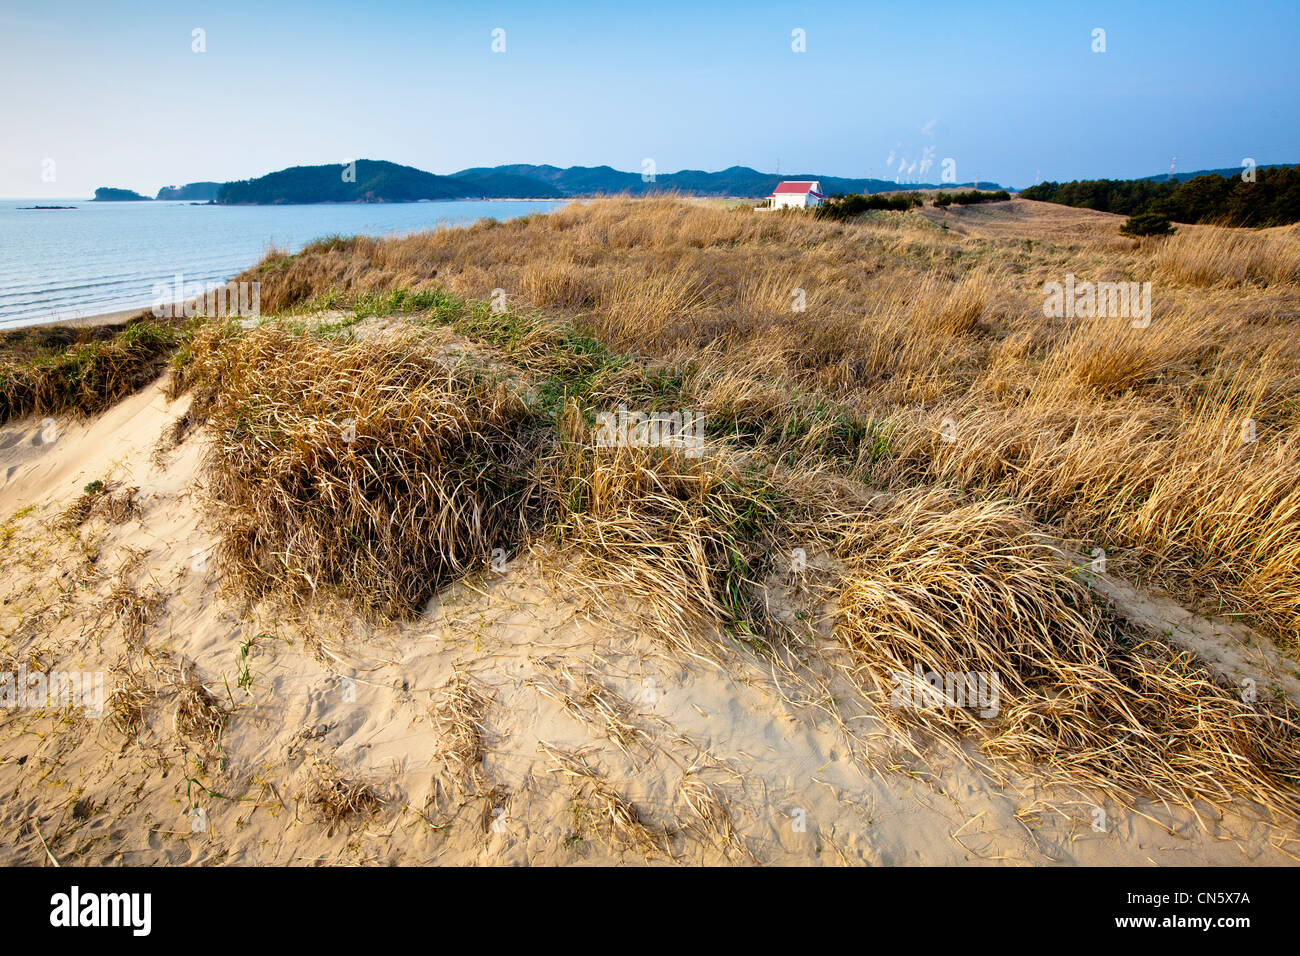 South Korea, South Chungcheong Province, Anmyeondo, Sinduri Coastal Sand Dune and isolated house in the distance Stock Photo